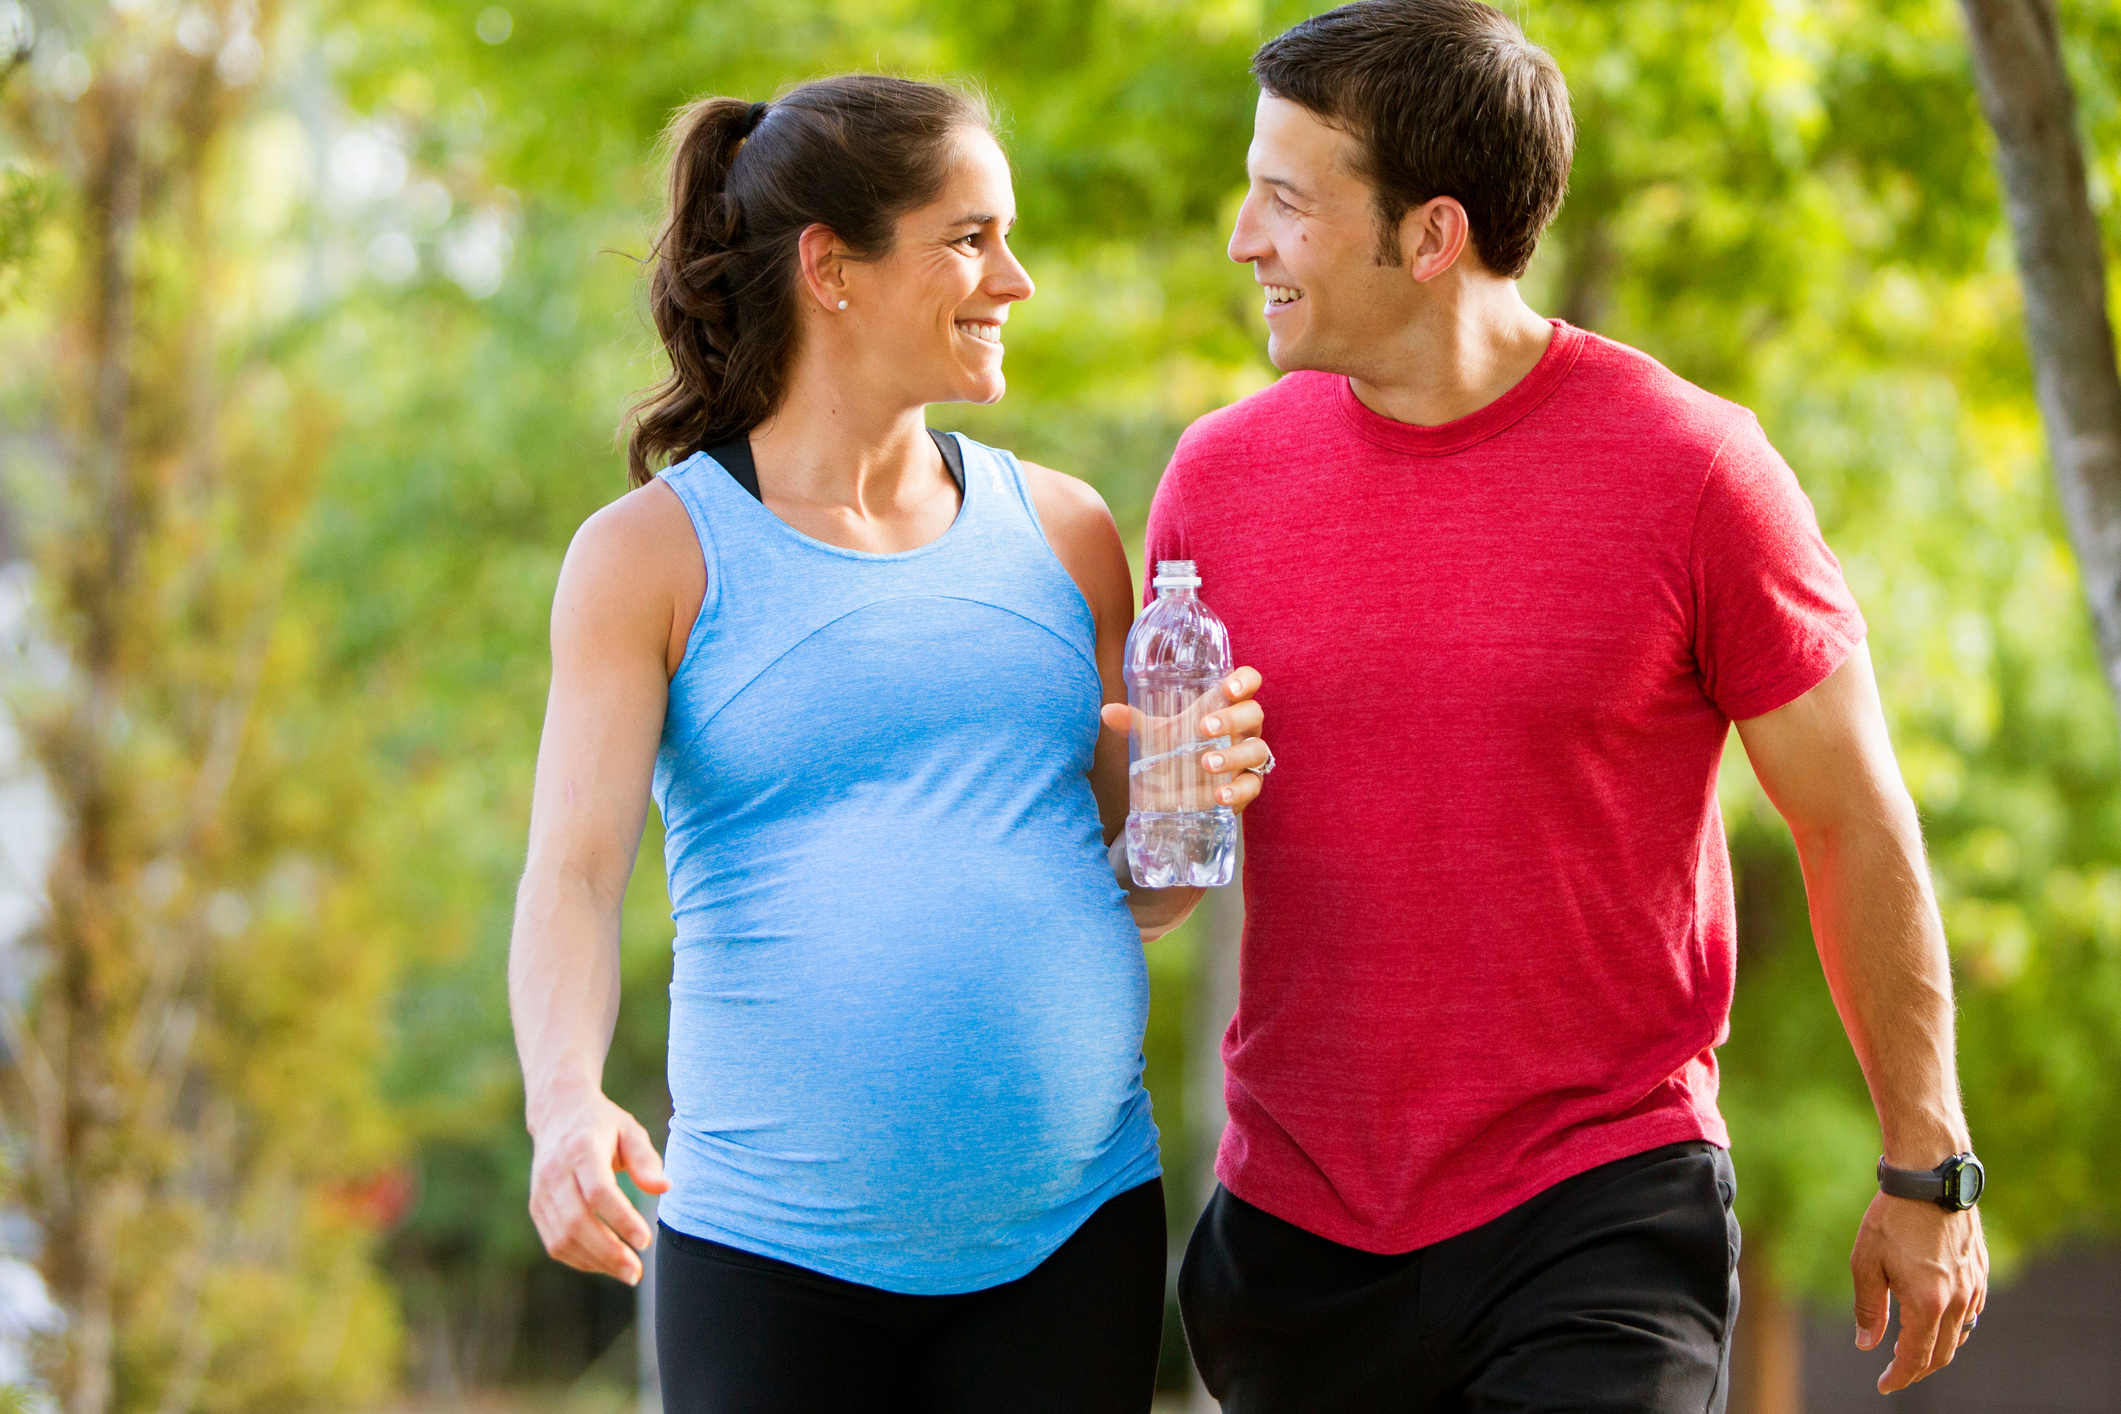 Simple Exercises You Can Do With Your Pregnant Partner - FamilyEducation